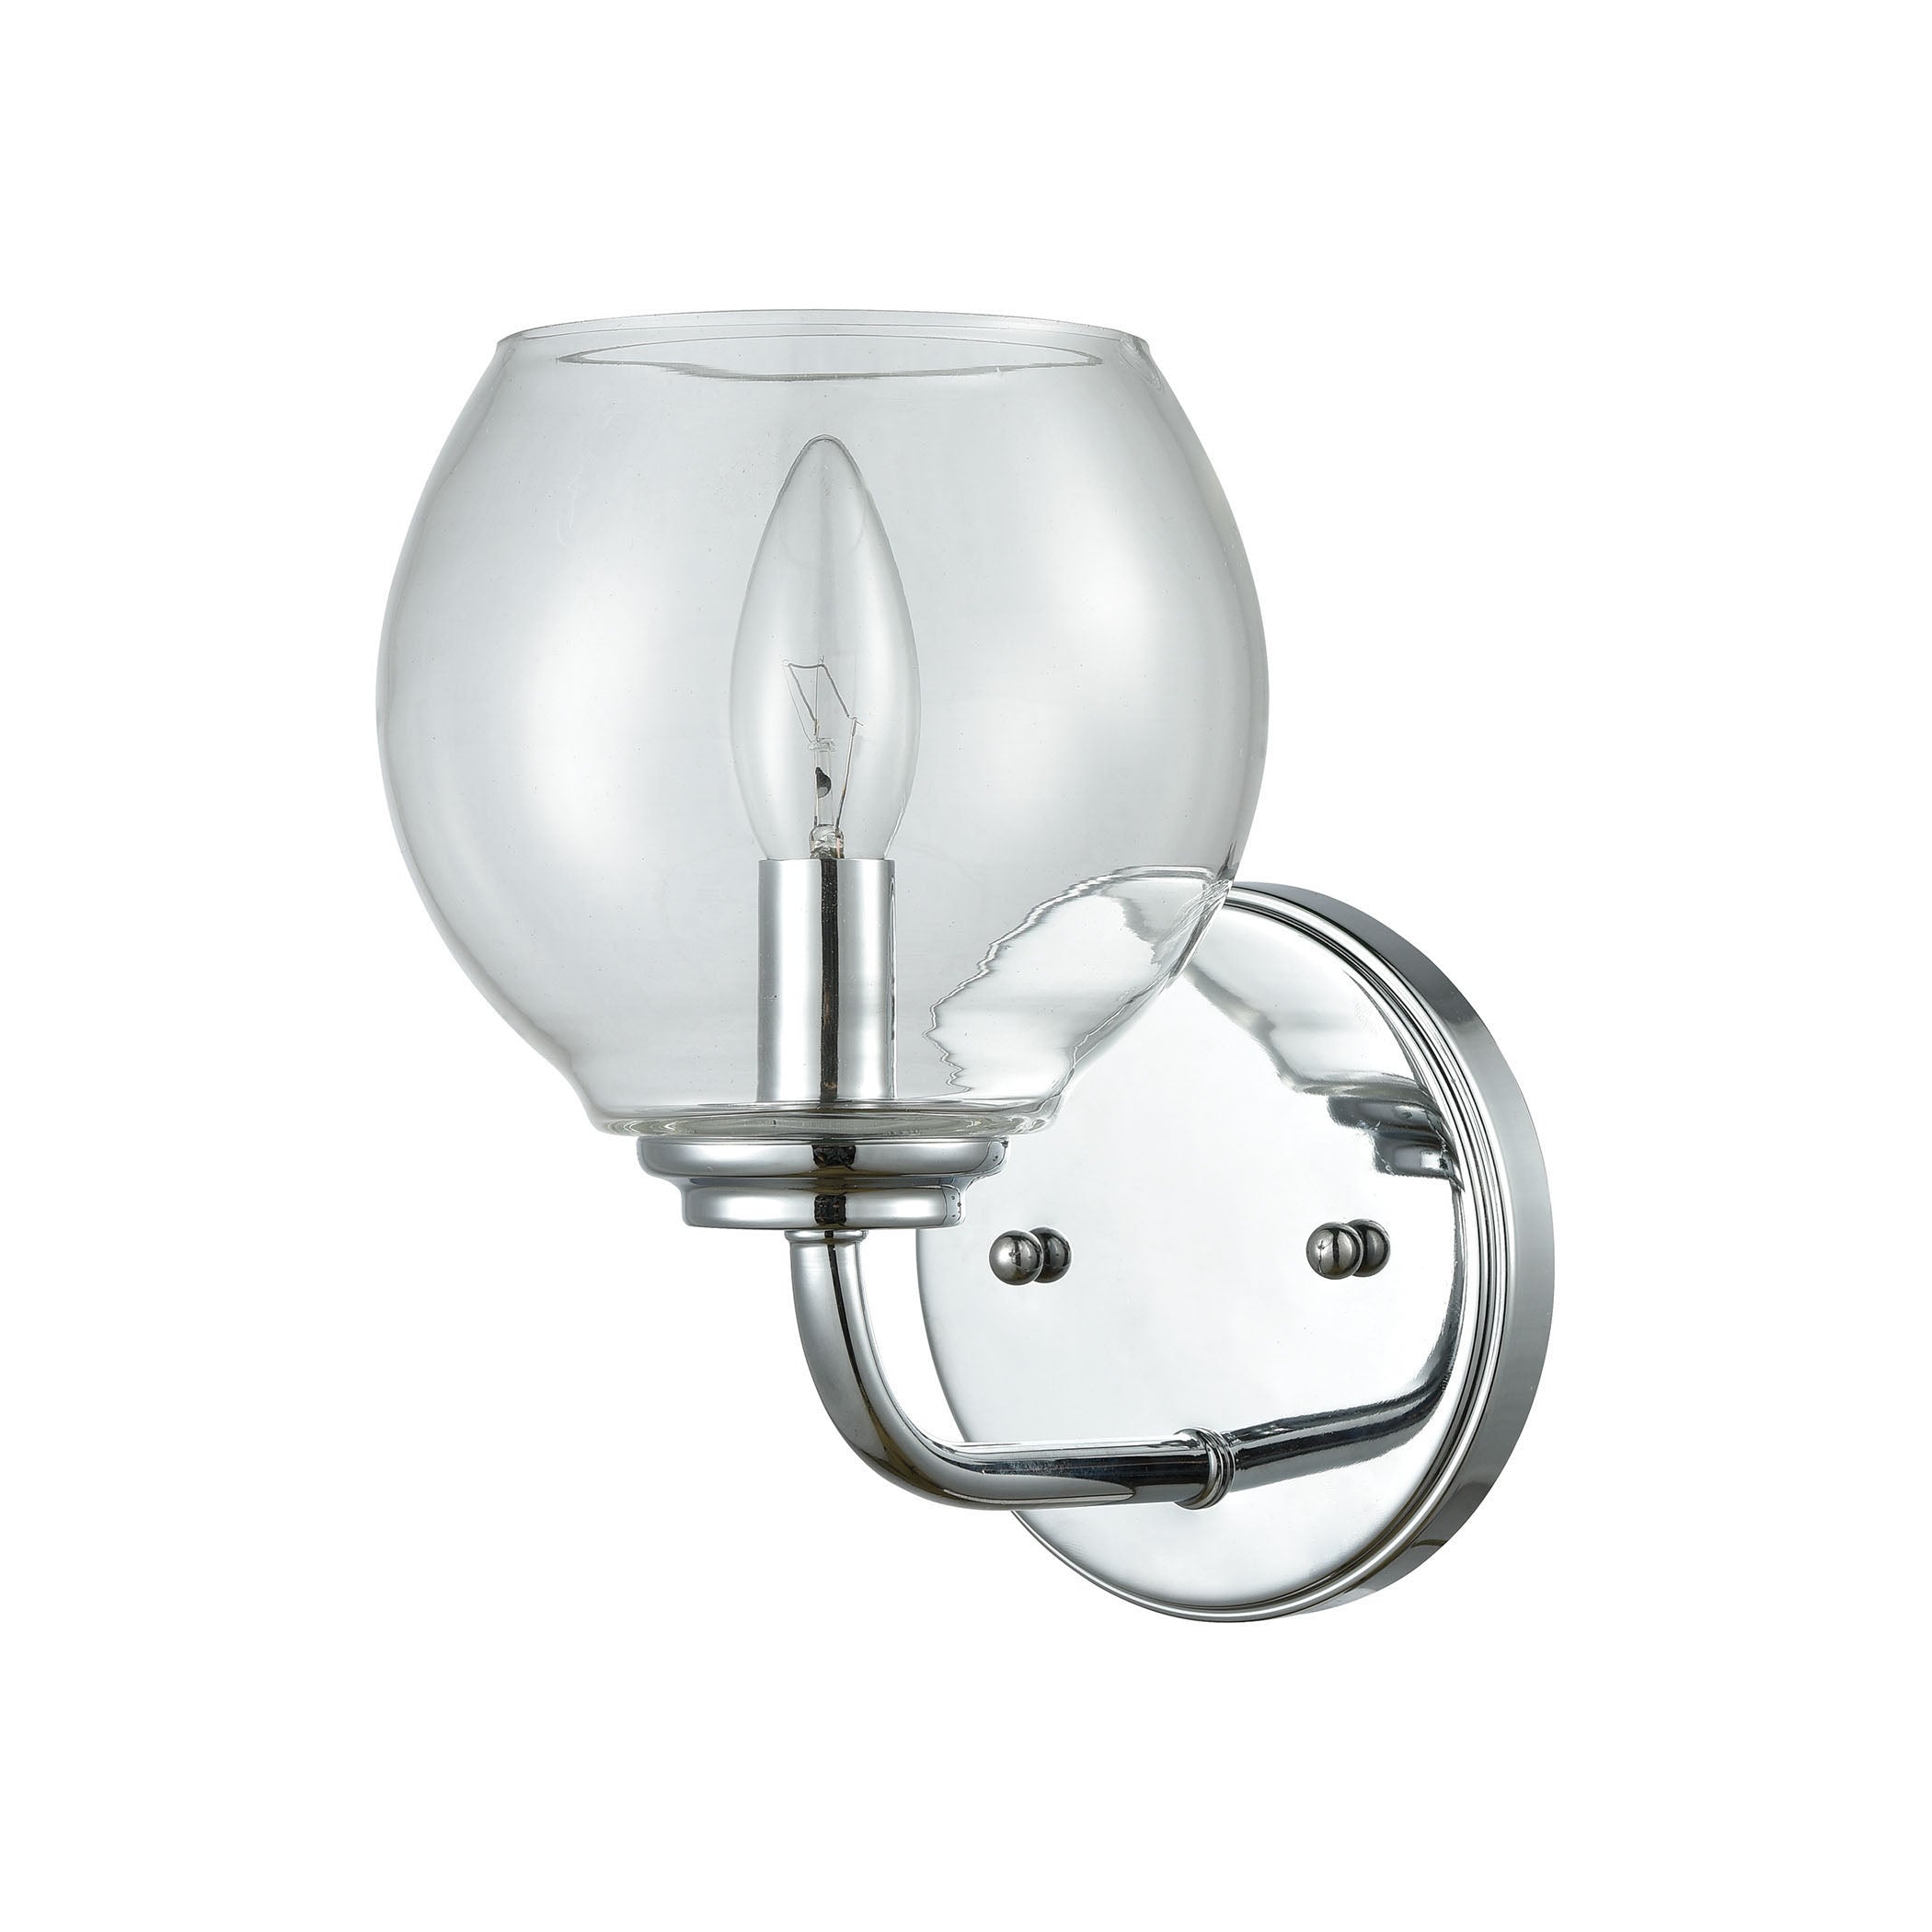 ELK Lighting 81360/1 Emory 1-Light Vanity Lamp in Polished Chrome with Clear Blown Glass